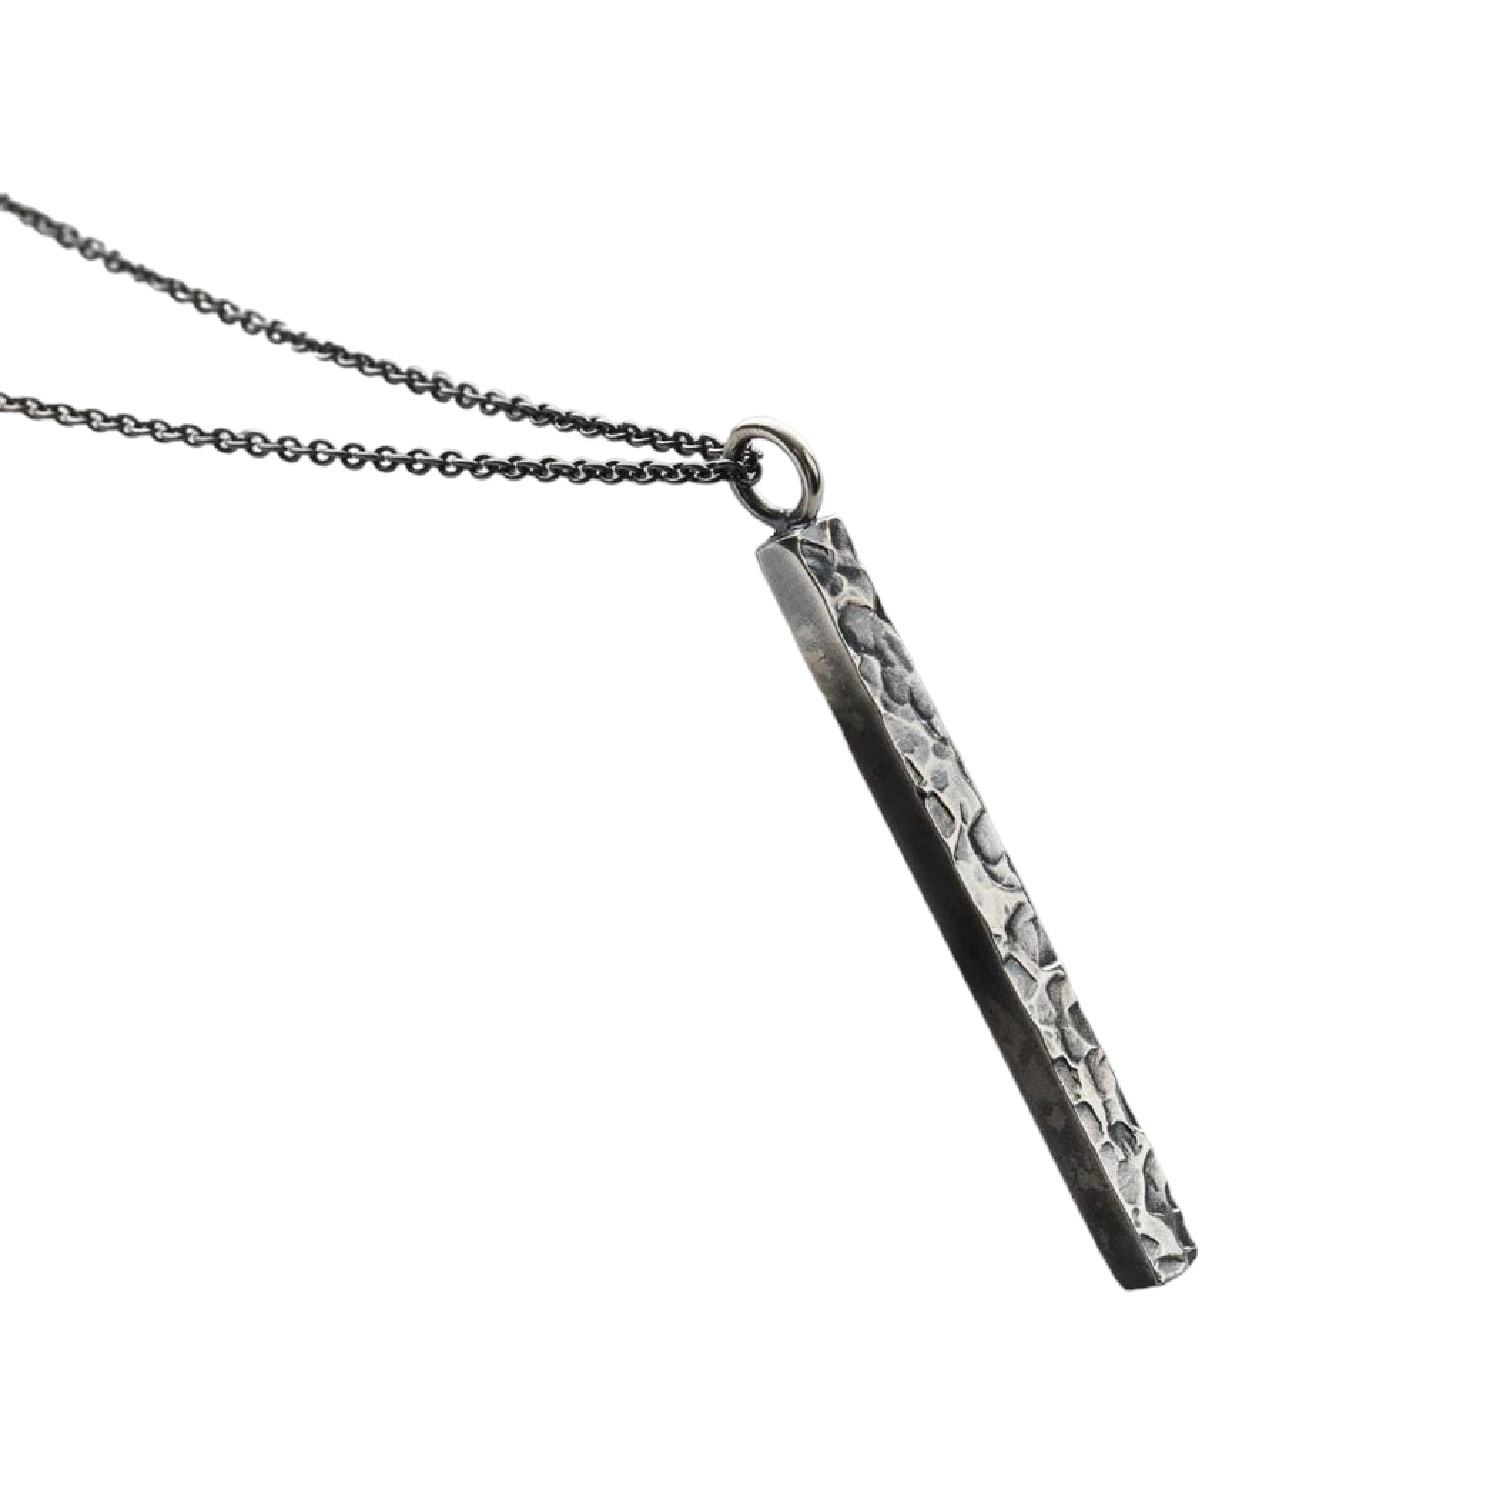 Men's Men's Textured Oxidised Sterling Silver Bar Necklace Posh Totty Designs